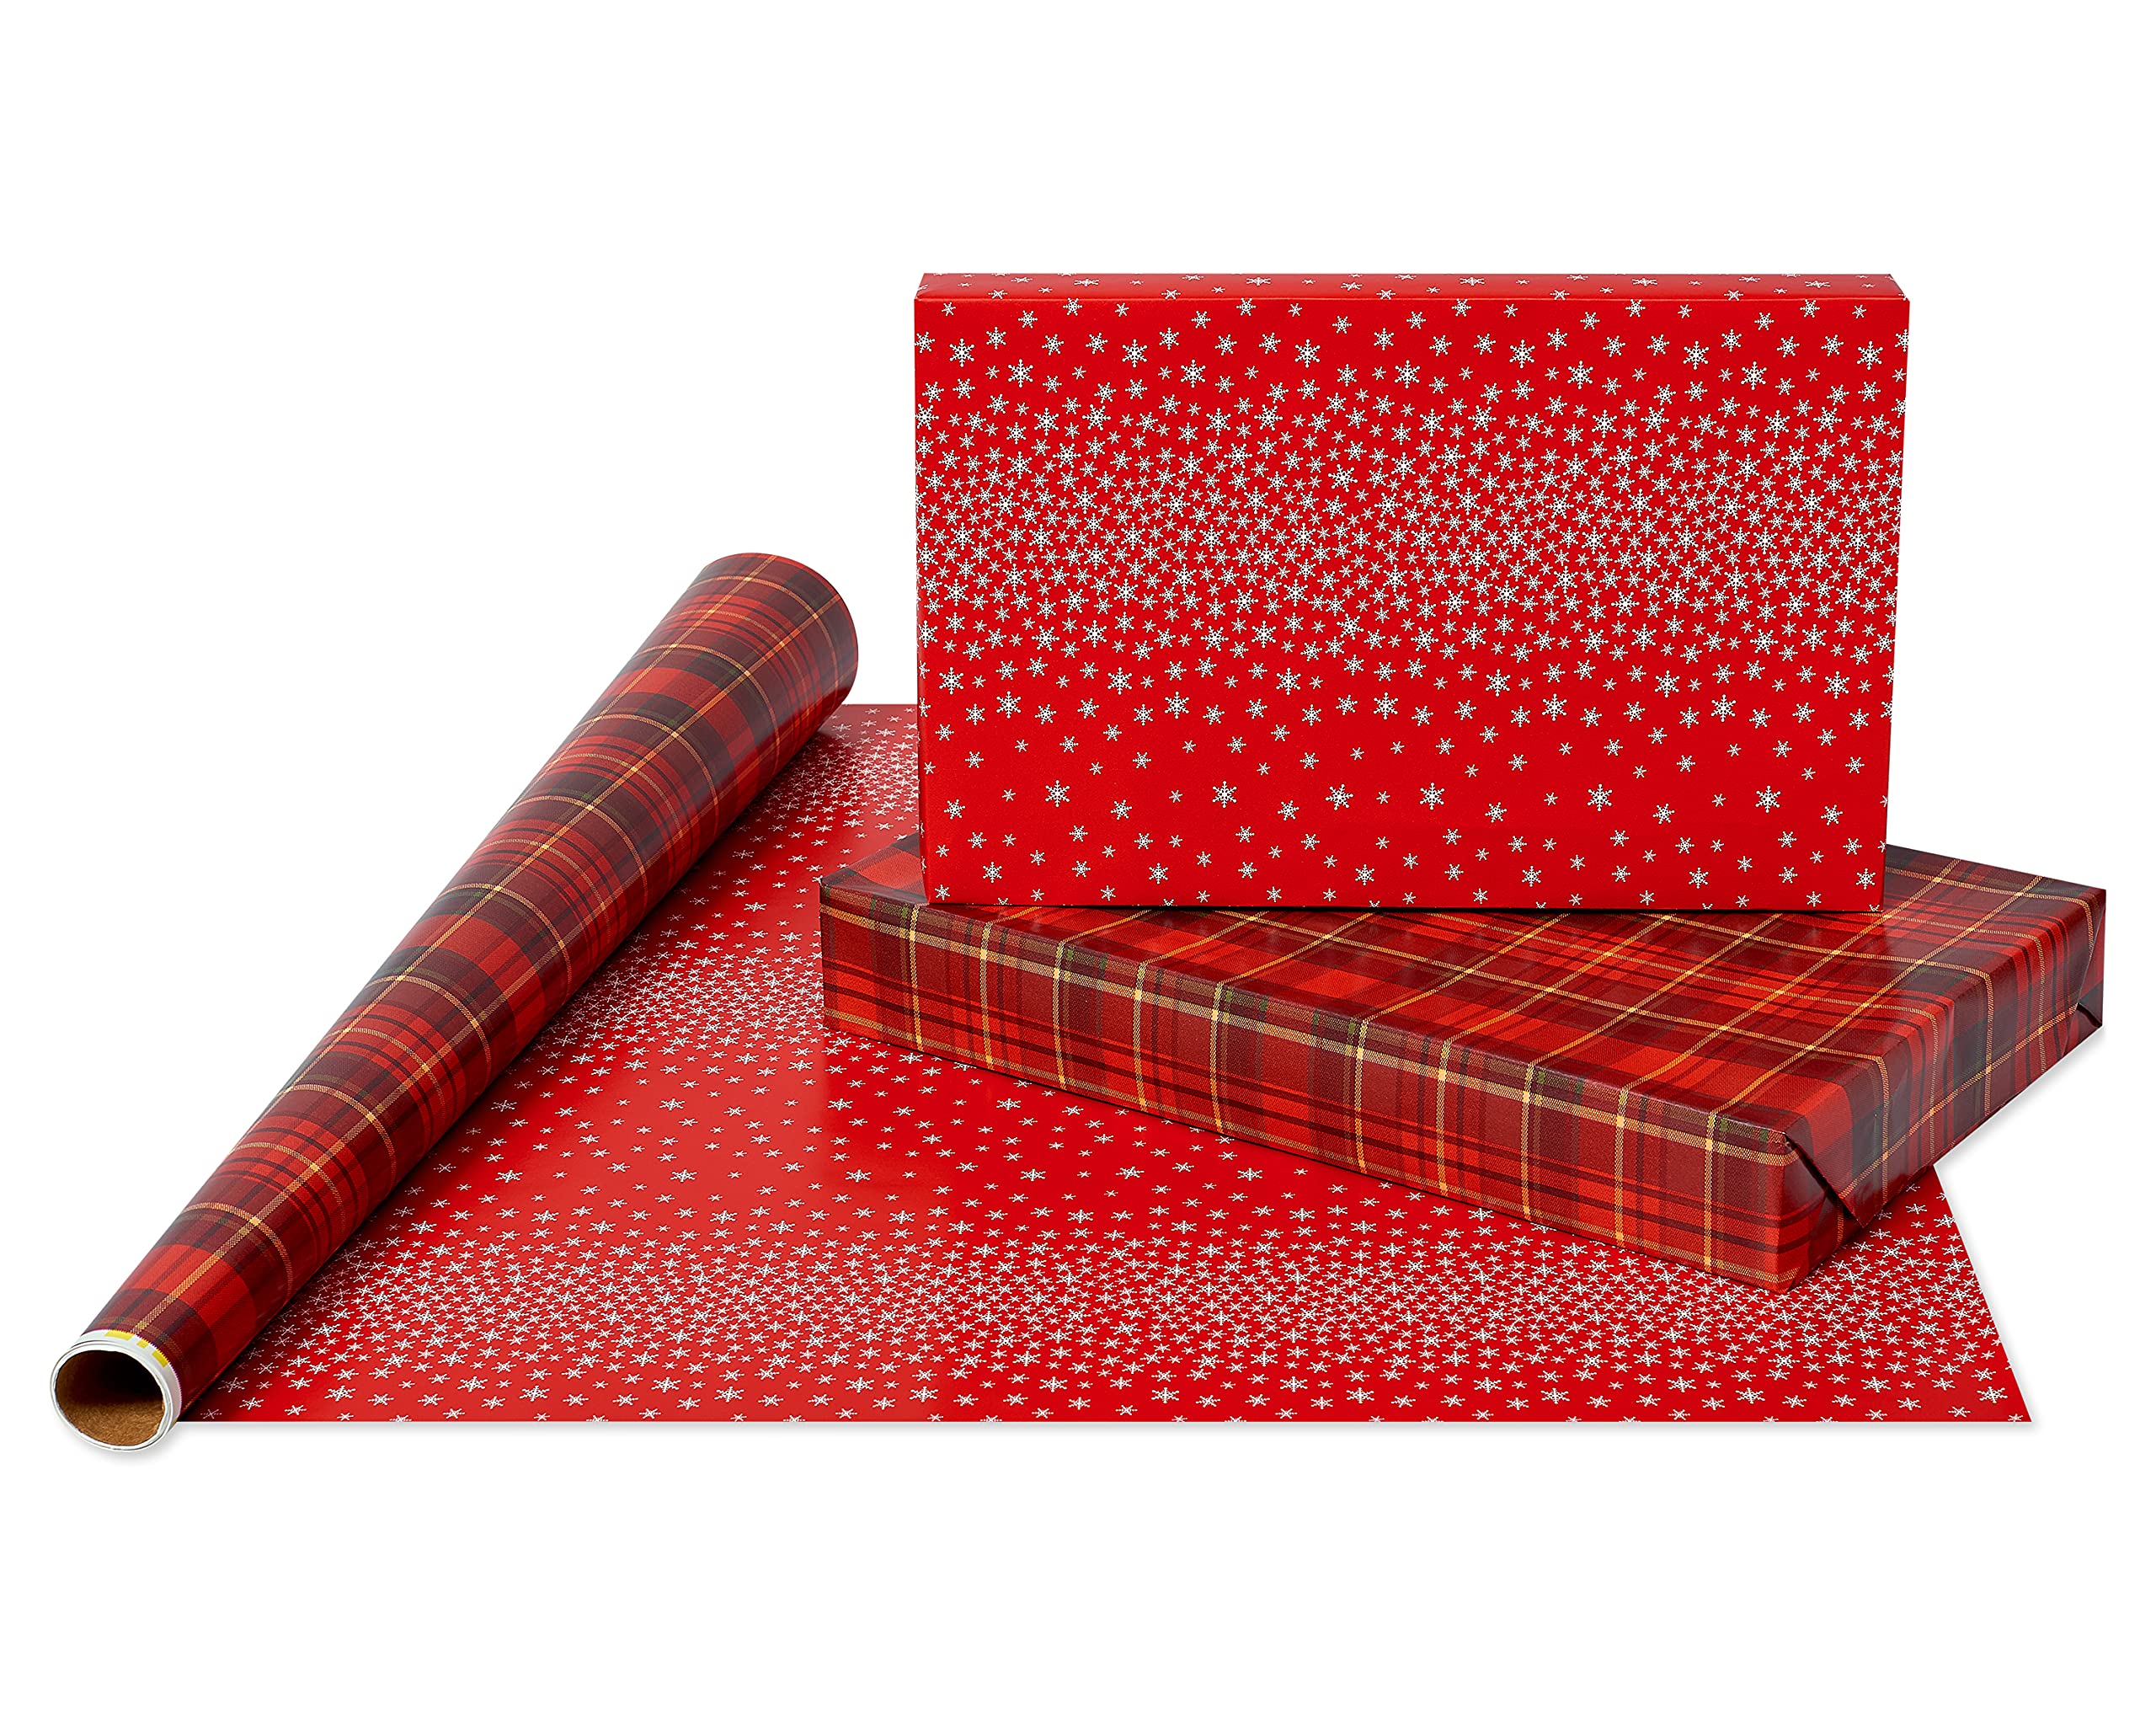 American Greetings Christmas Wrapping Paper Bundle, Rustic Designs (4 Rolls, 160 sq. ft) & Christmas Reversible Wrapping Paper Jumbo Roll, Snowflakes (1 Roll, 175 sq. ft.)